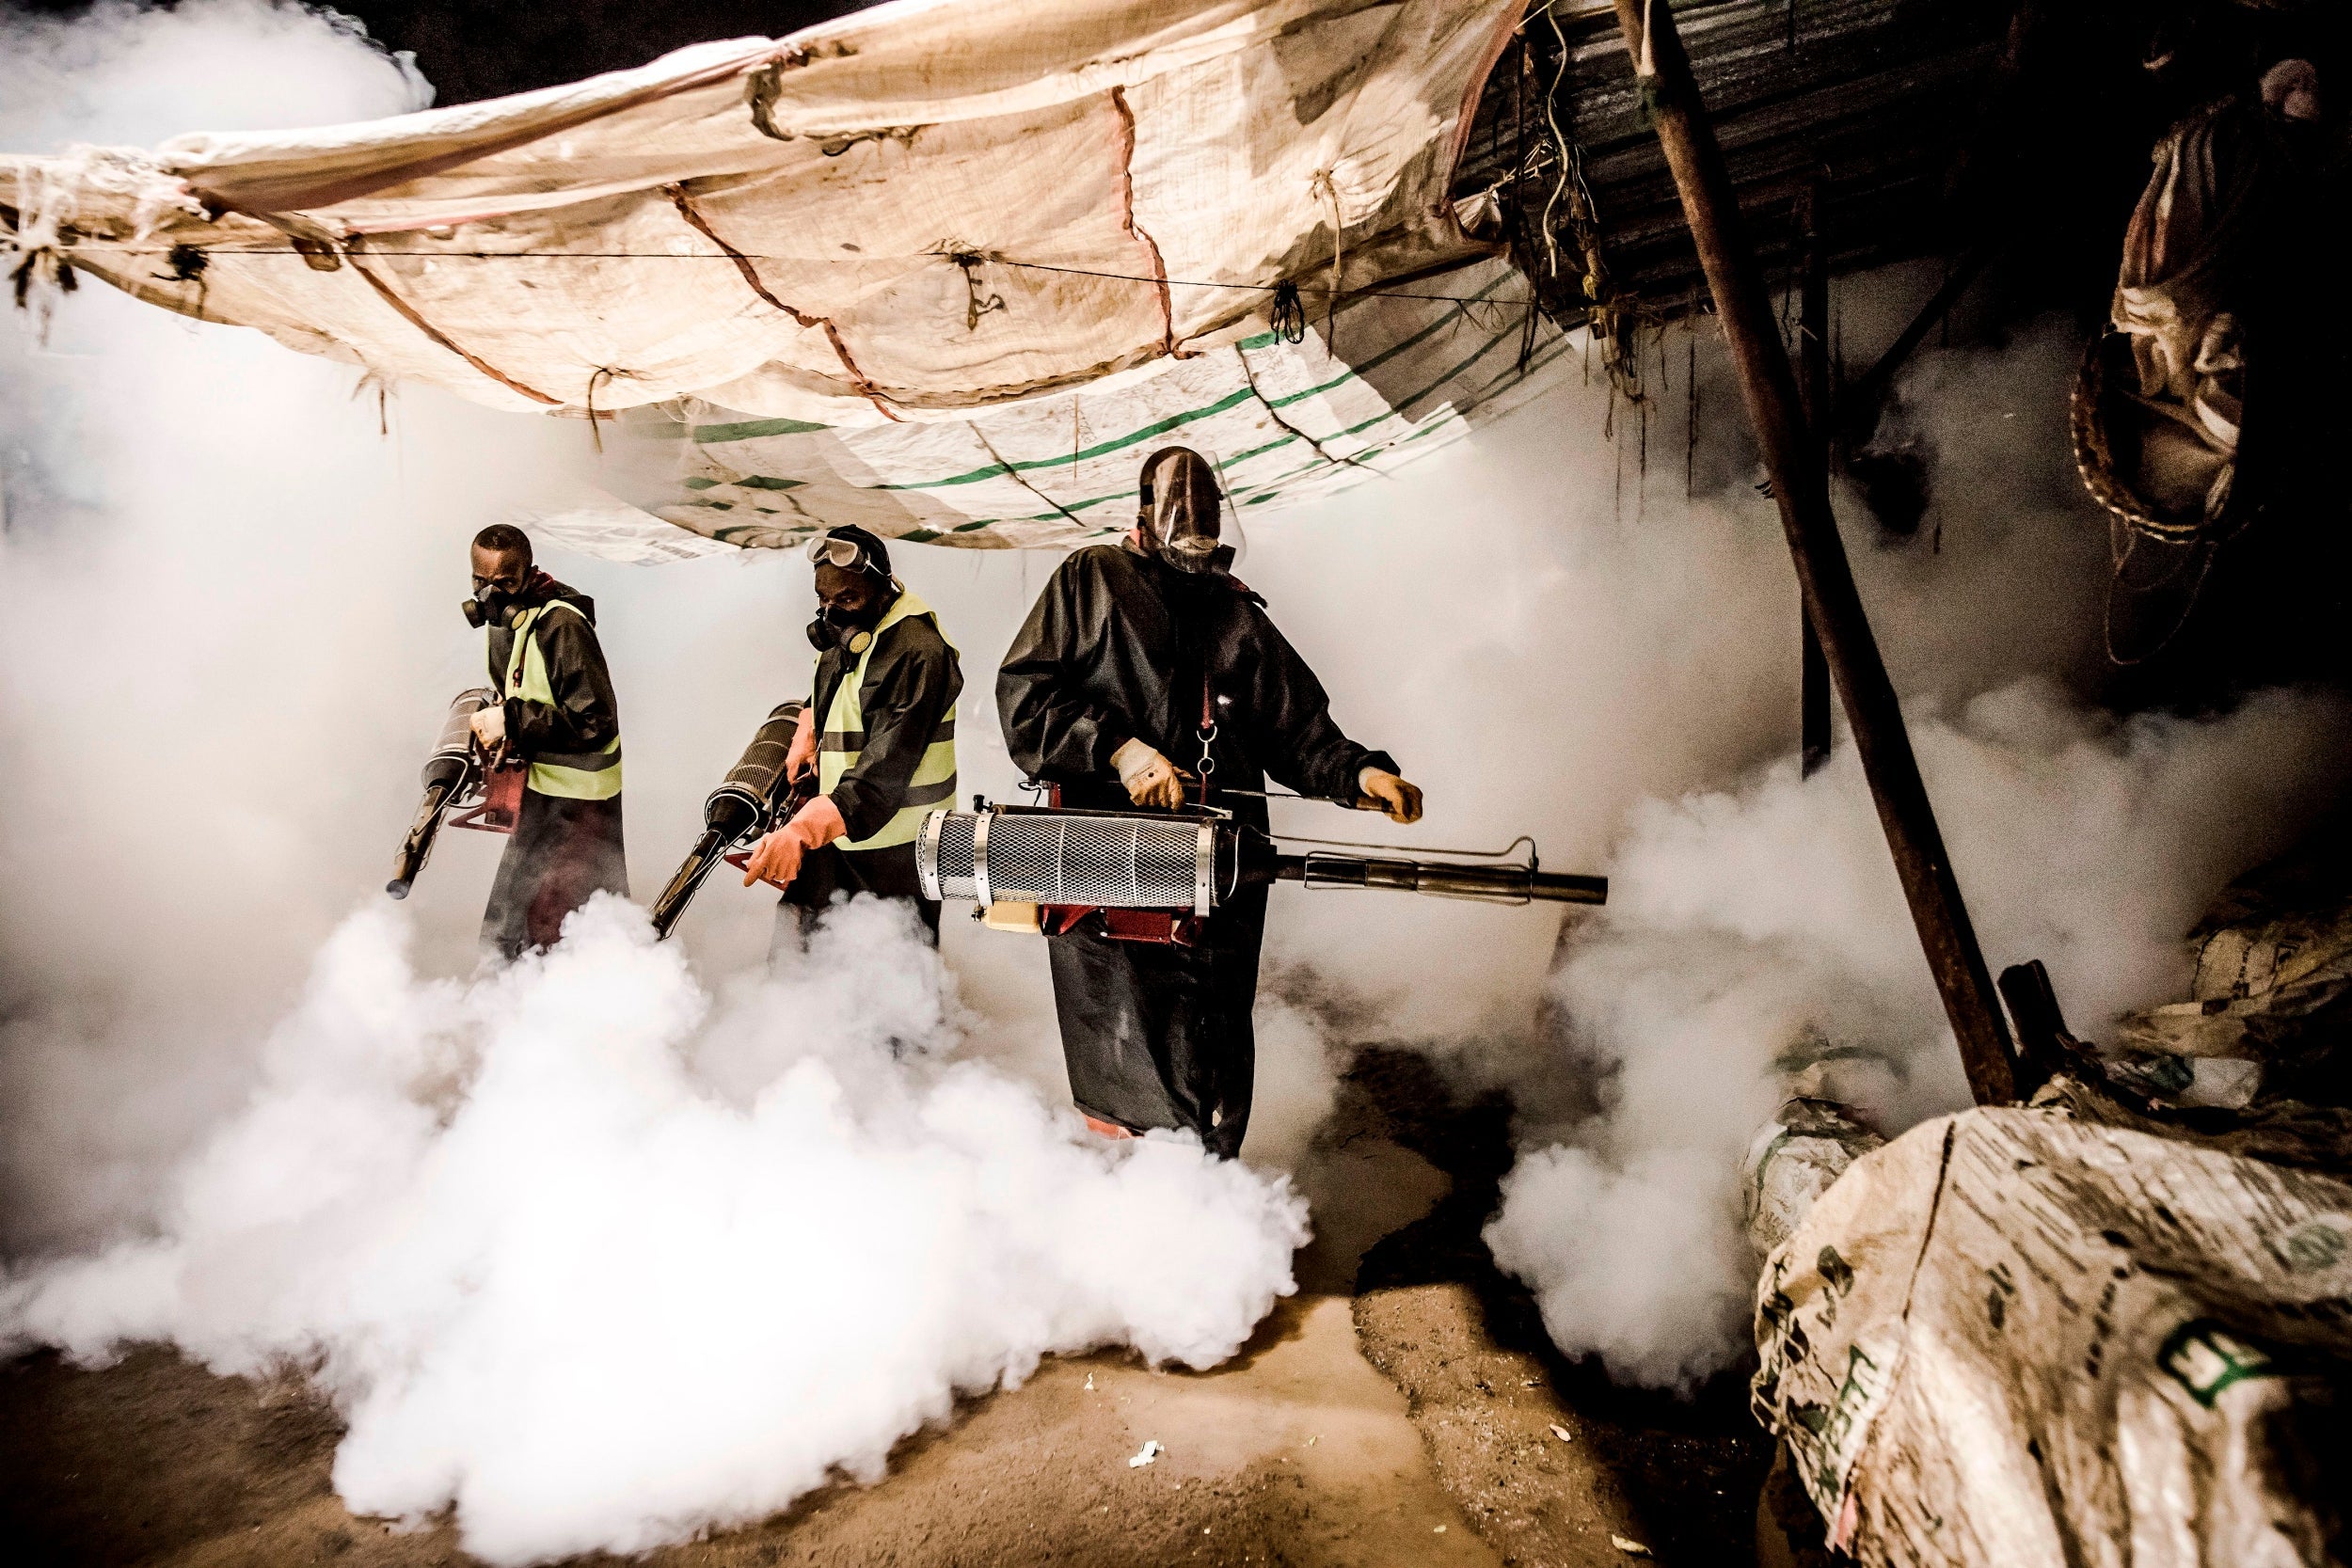 Members of a privately funded NGO fumigate a market in Nairobi